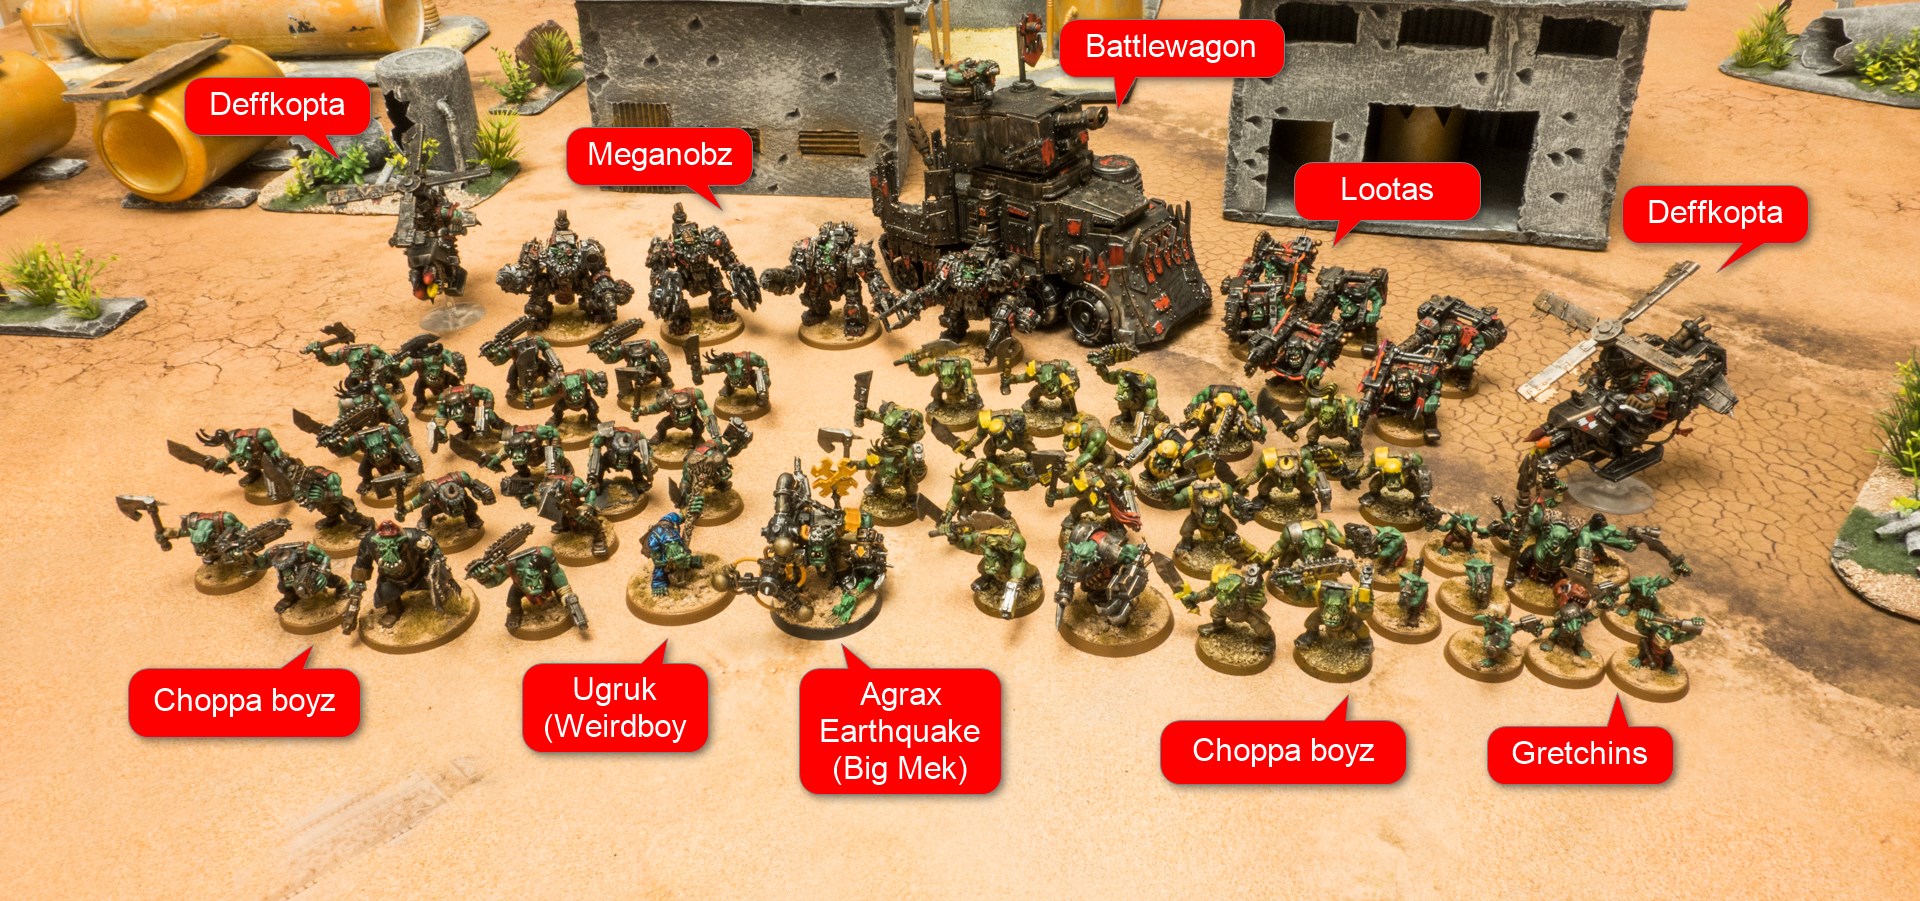 Agrax's army